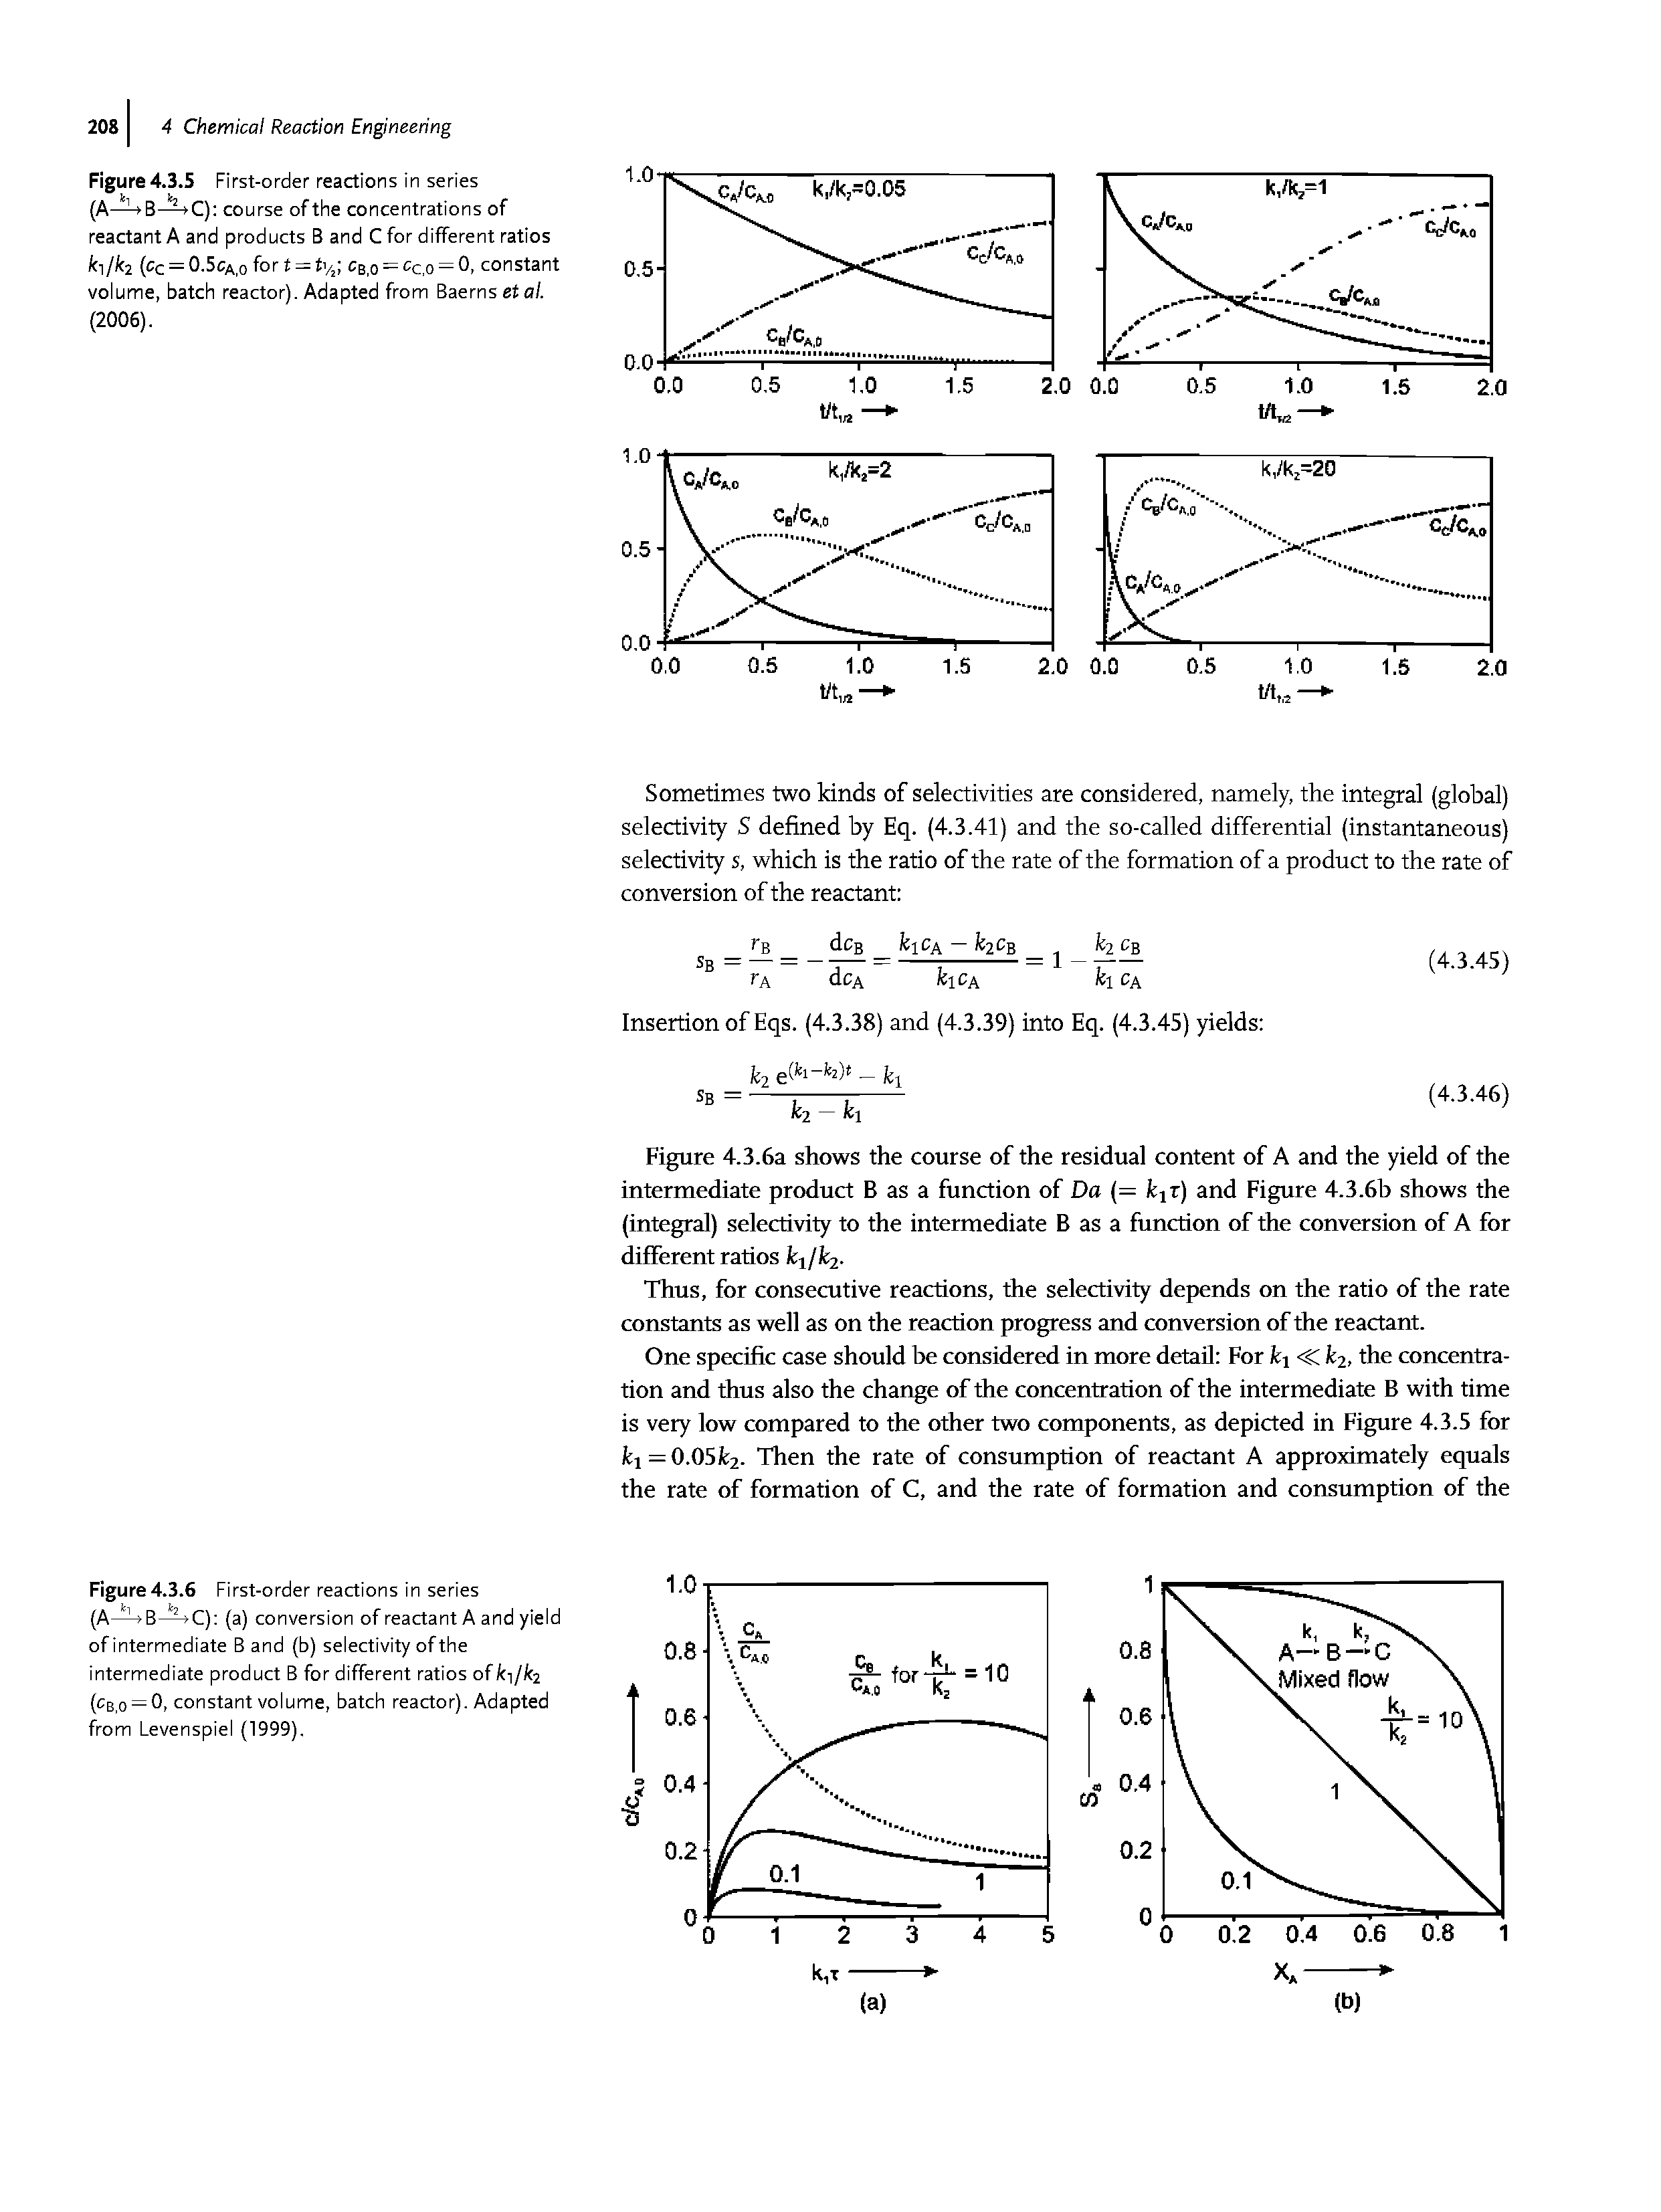 Figure 4.3.6 First-order reactions in series (A l B C) (a) conversion of reactant A and yield of intermediate B and (b) selectivity of the intermediate product B for different ratios of/ci//t2 (cb,o = 0, constant volume, batch reactor). Adapted from Levenspiel (1999).